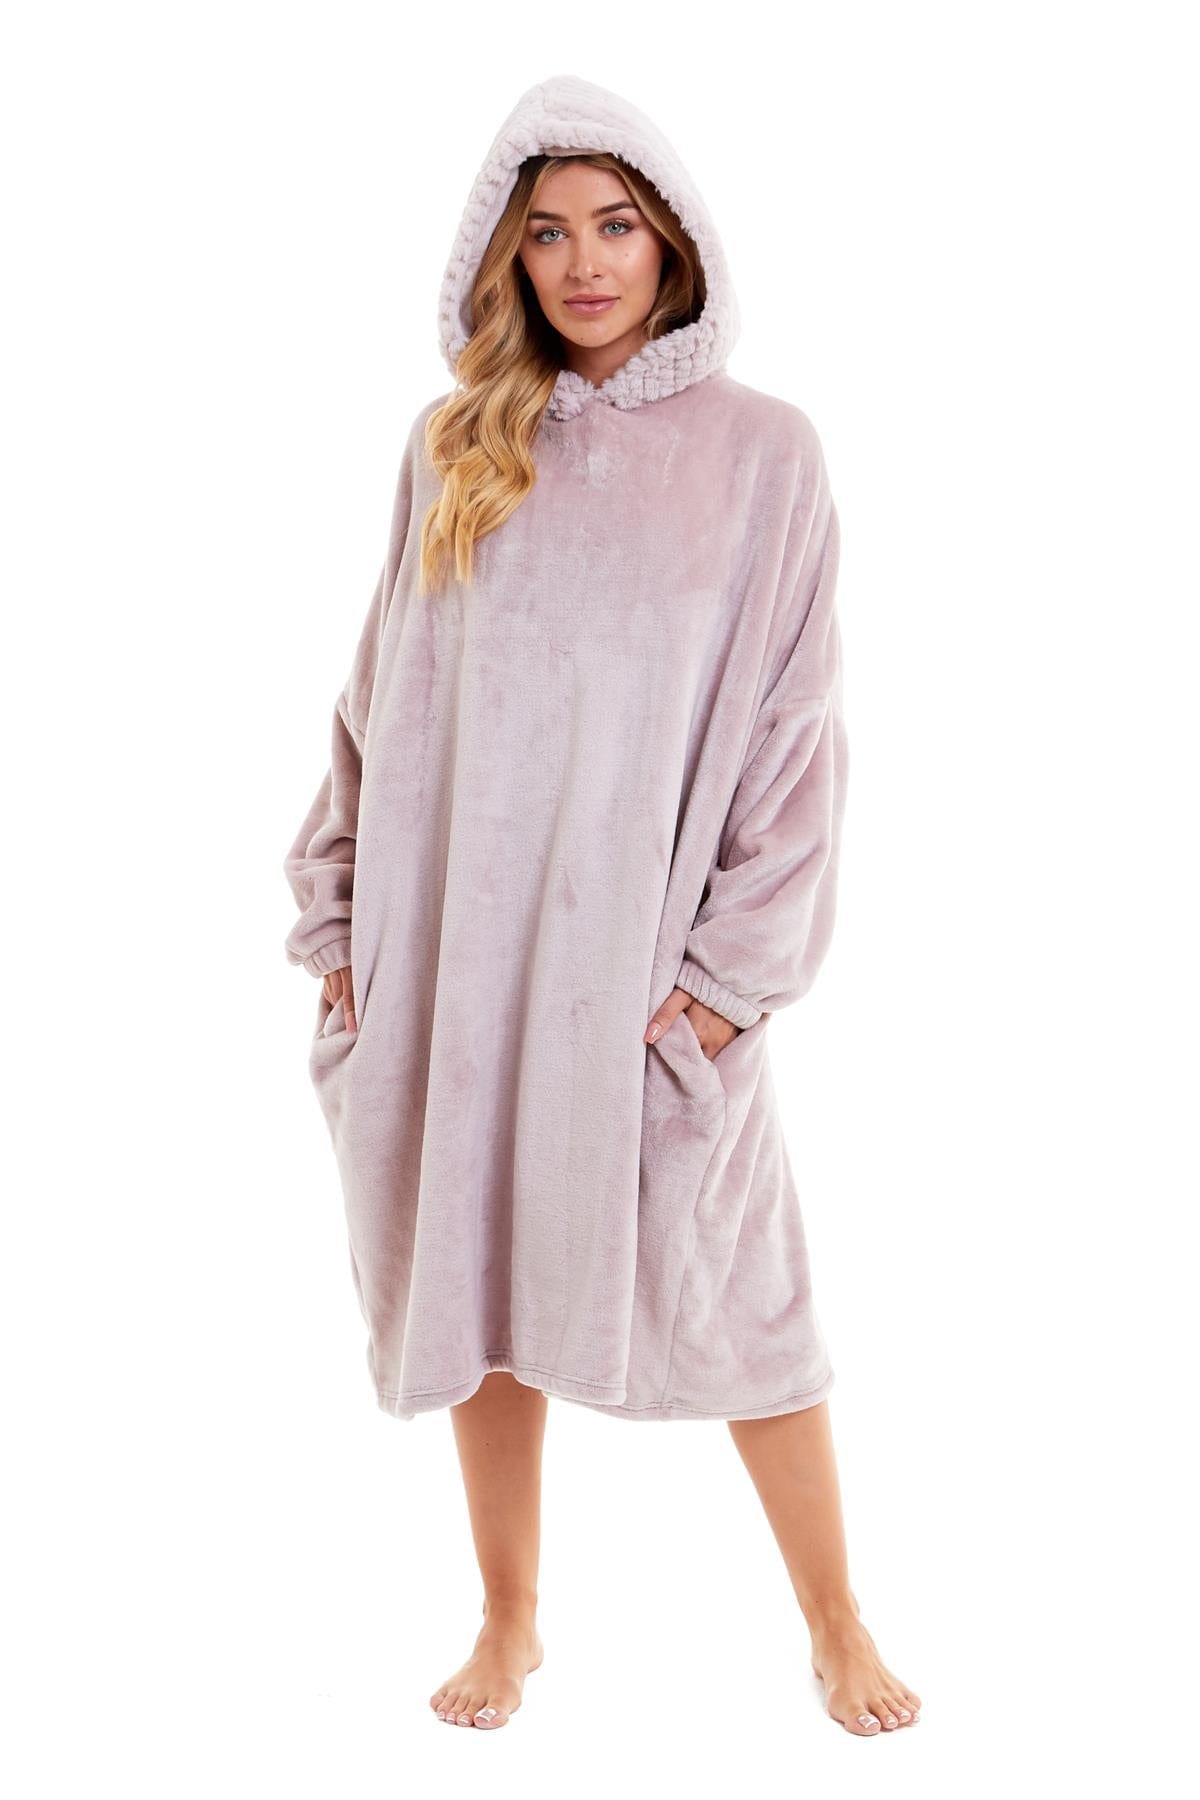 Women's Plush Hooded Poncho Blanket Oversized Thermal Hoodie Top Long Length PINK Daisy Dreamer Dressing Gown